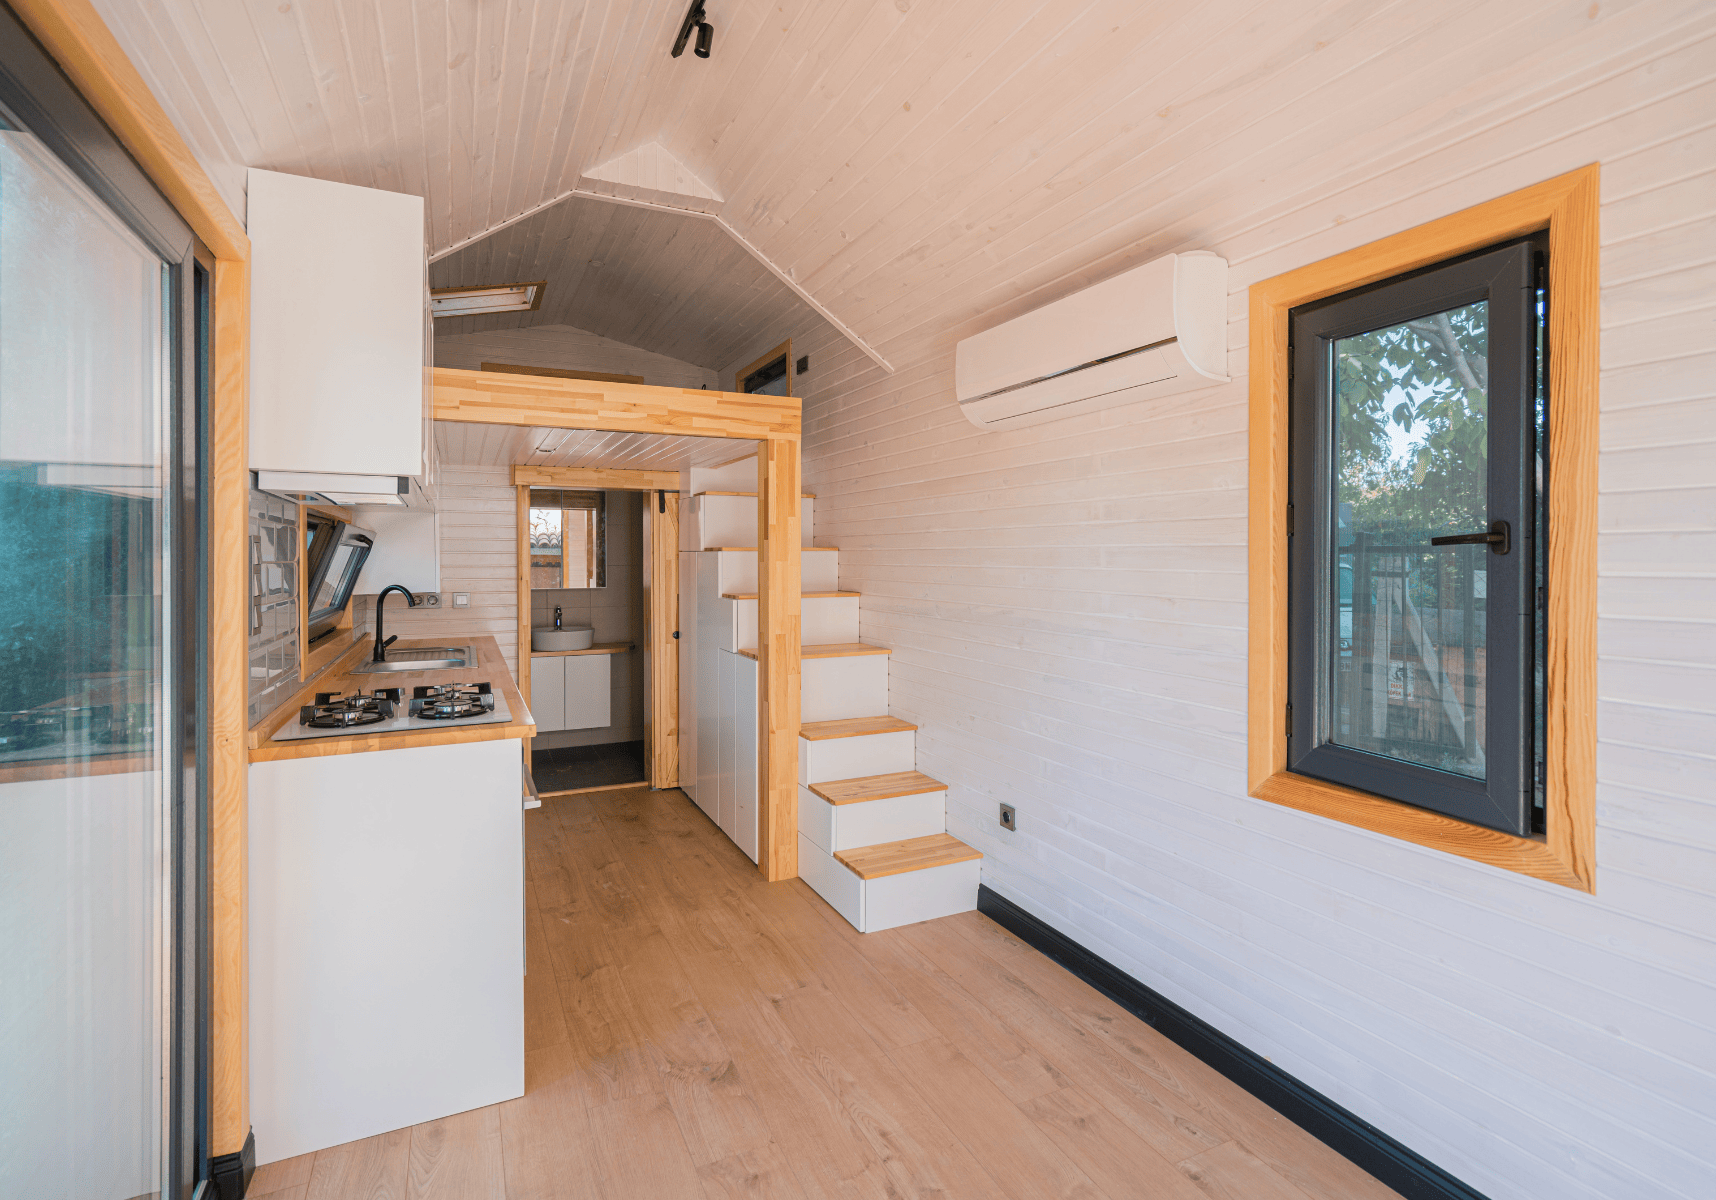 8 Tips for Cooking in a Tiny Home Kitchen